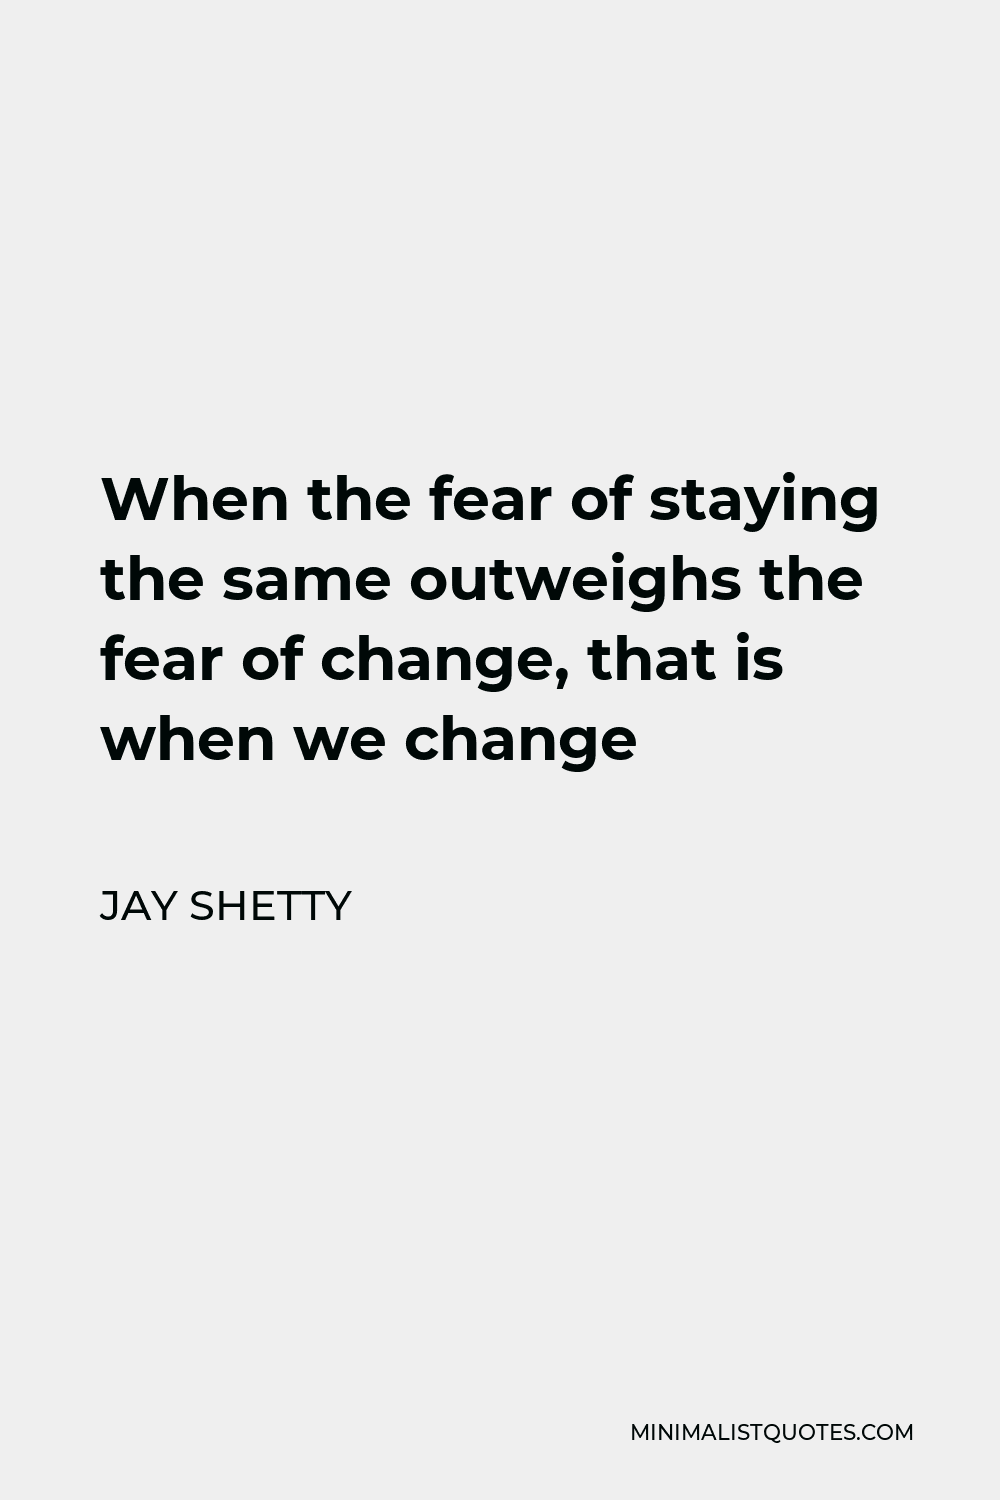 Jay Shetty Quote - When the fear of staying the same outweighs the fear of change, that is when we change